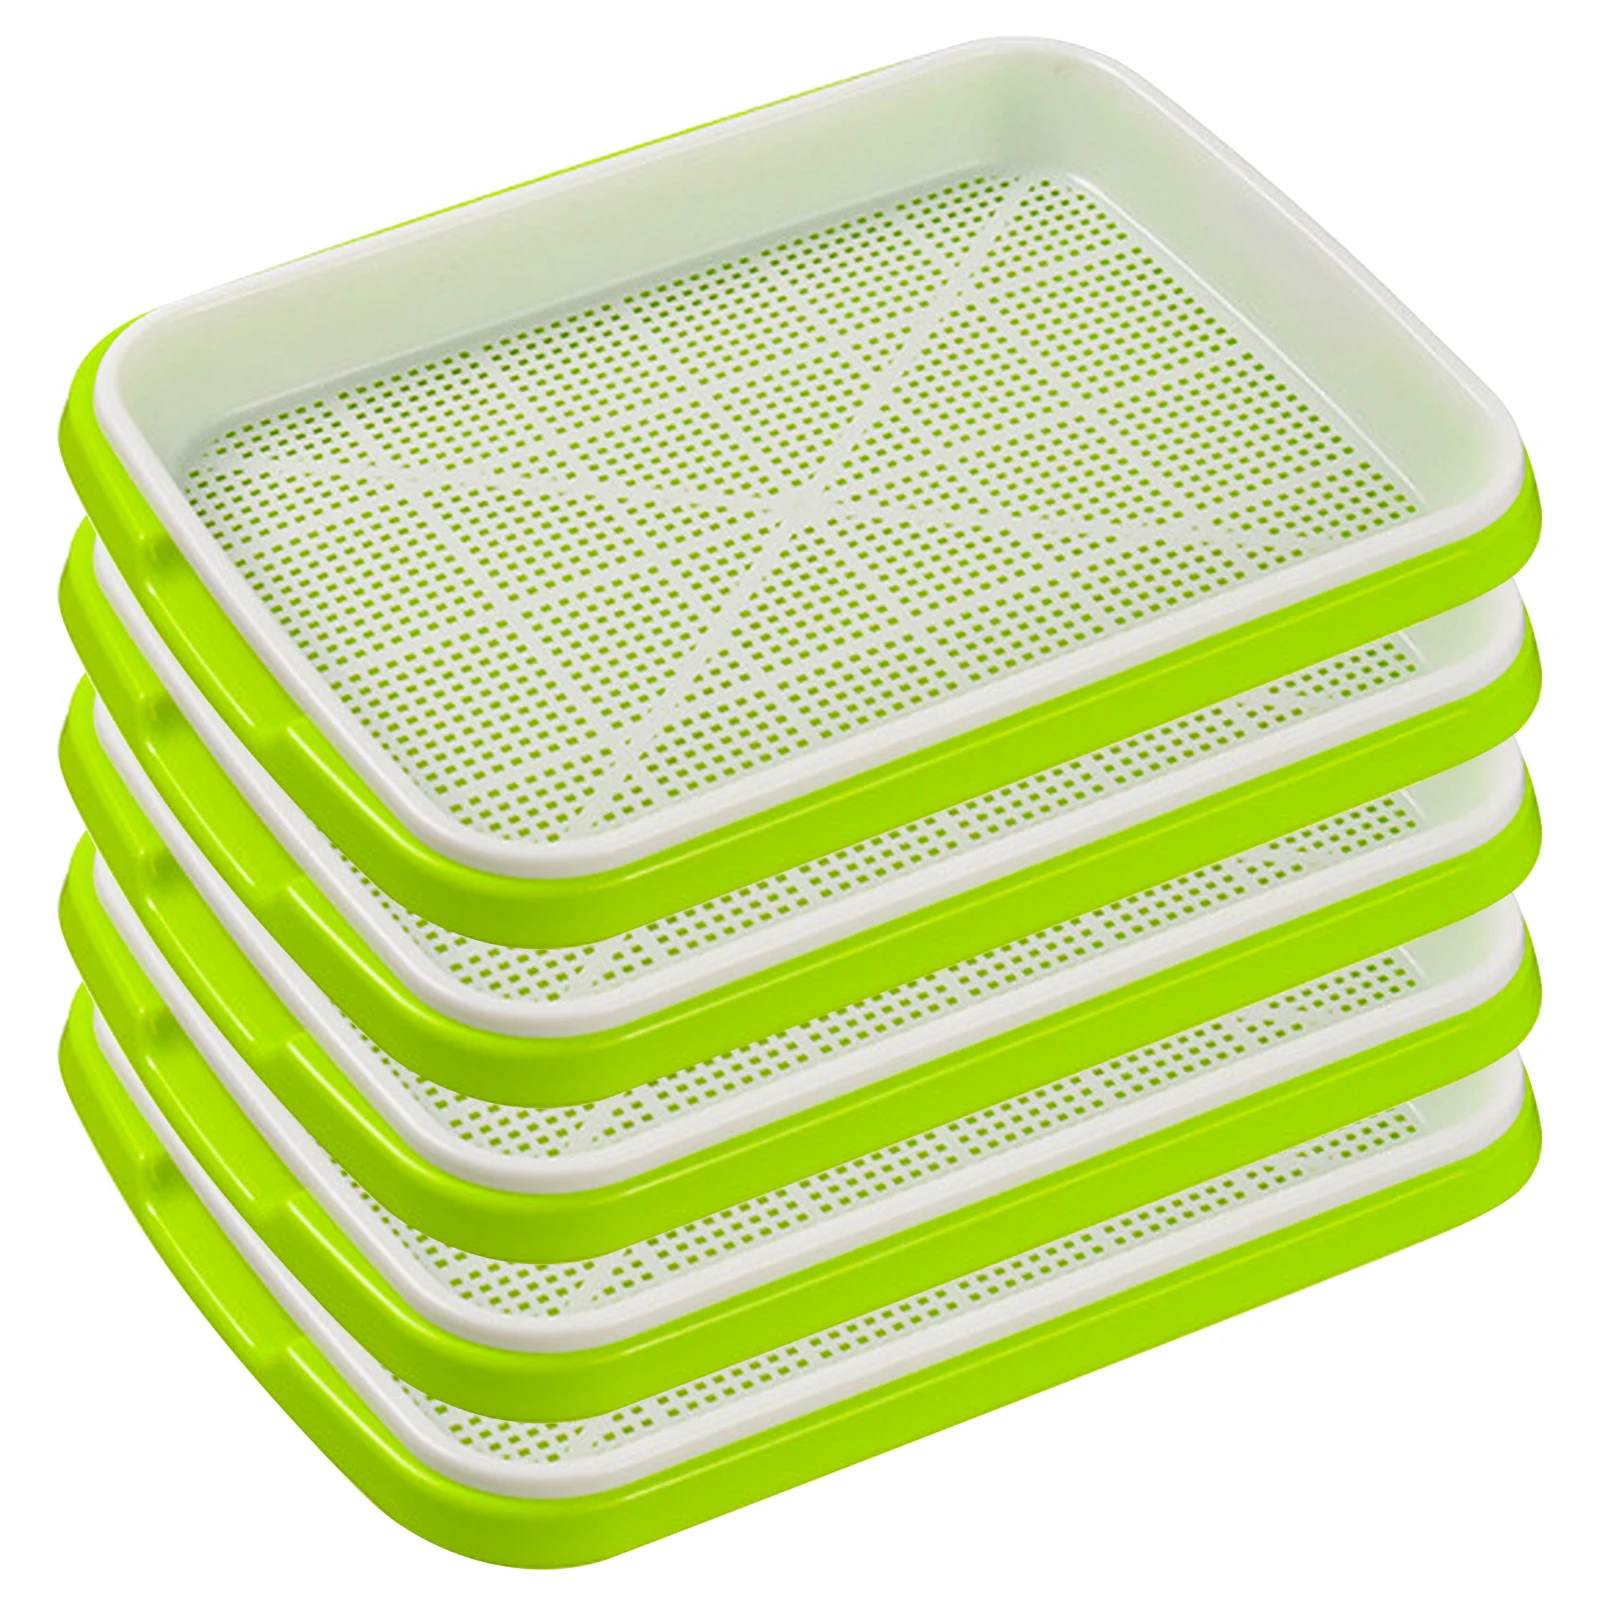 5Pcs Seed Sprouter Tray BPA Free Nursery Tray Seed Germination Tray Healthy Wheatgrass Seeds Grower Trays for Garden Home Office